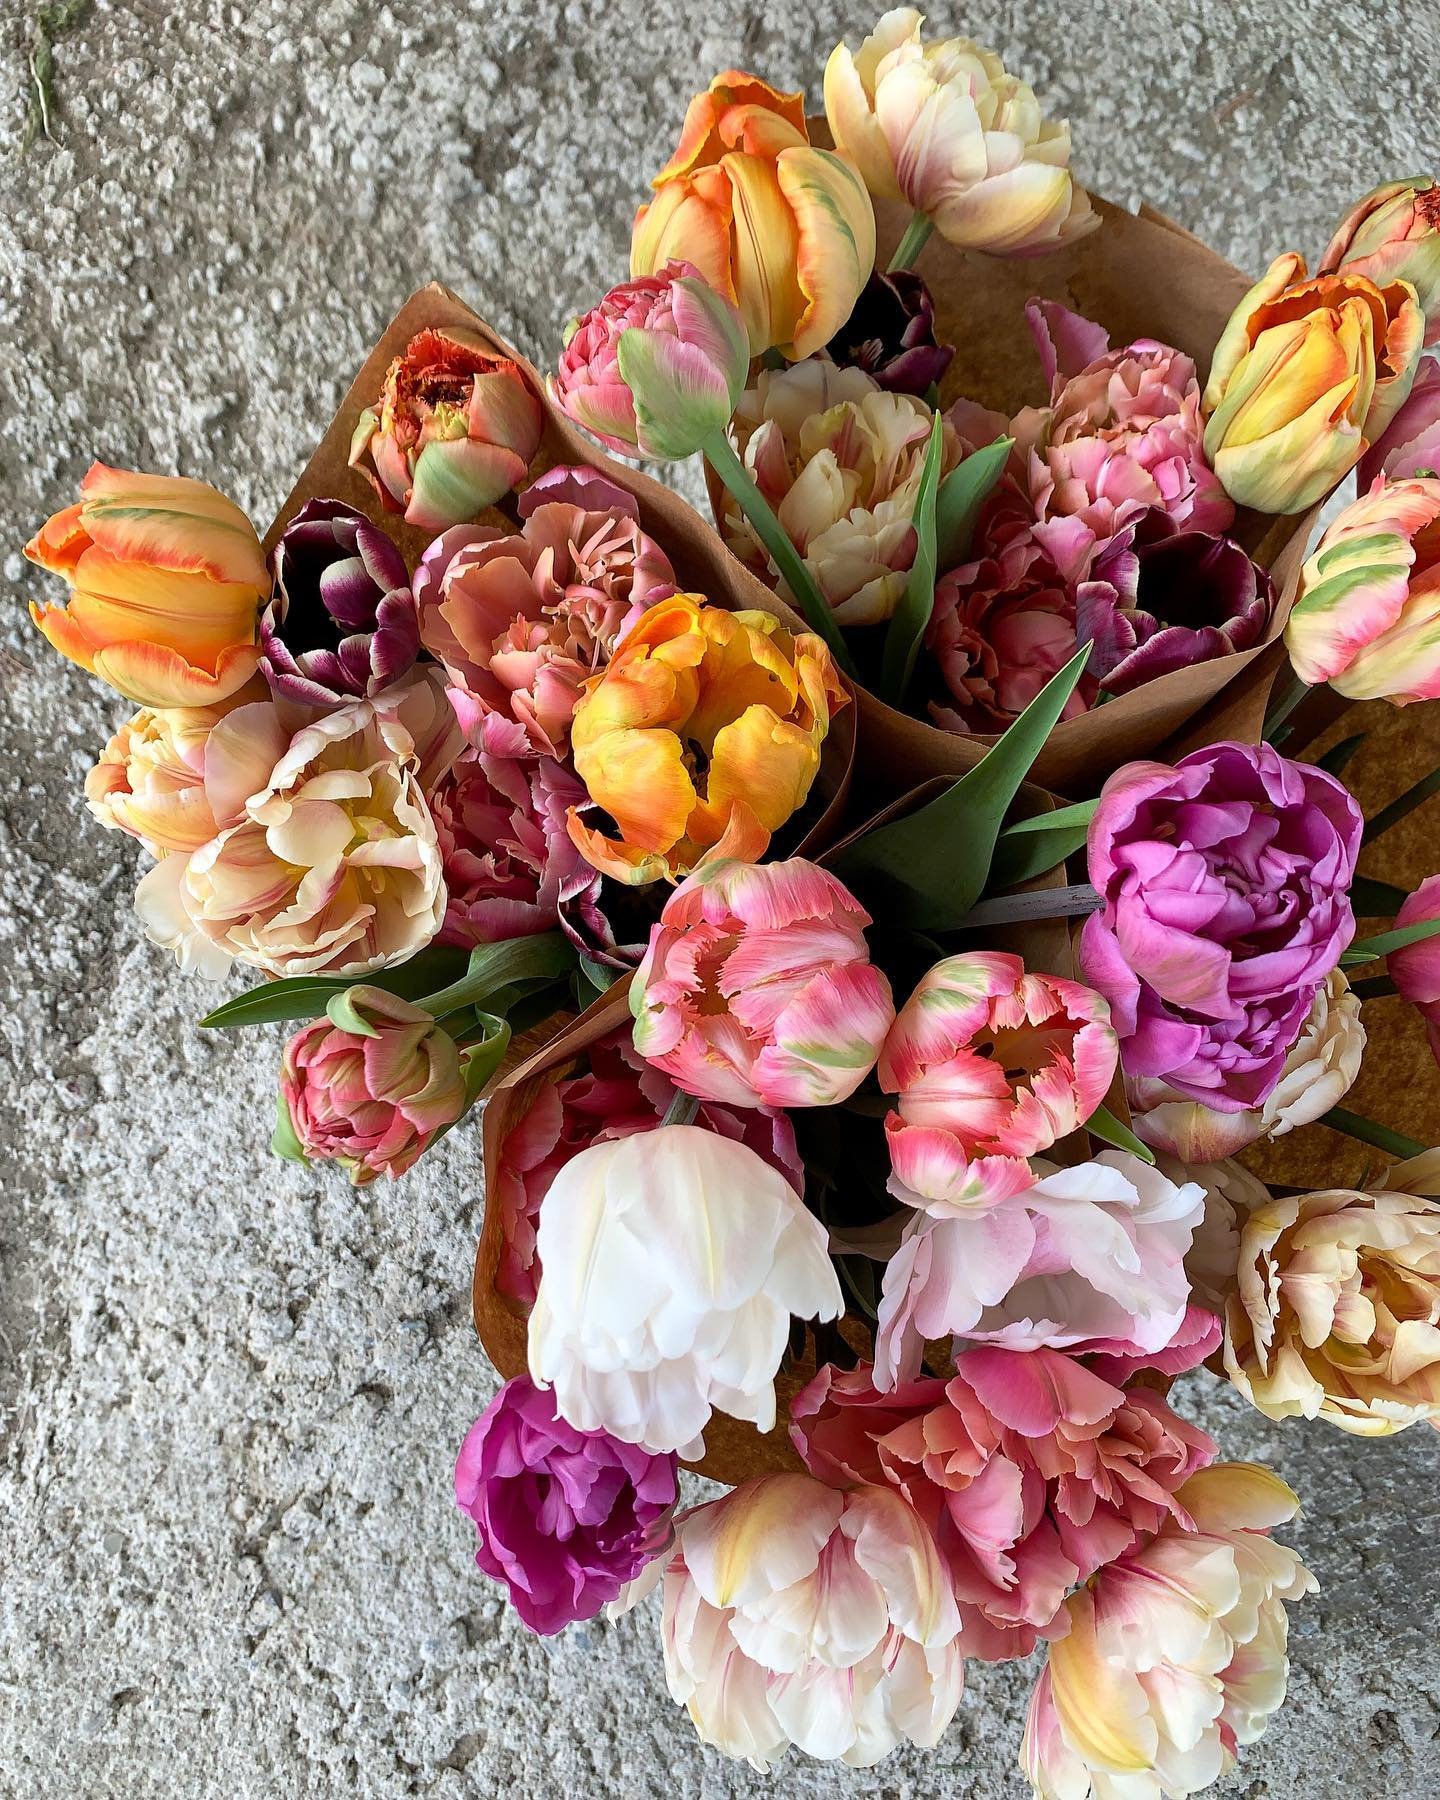 Keeping up with the tulips this year at 36 weeks pregnant is not the easiest task 🥵 But the flower coop is stocked this morning with more beauties for your mid-week pick me up!  Treat yourself or someone you love 💕
.
.
.
#cutflowers #cutflowerfarm 